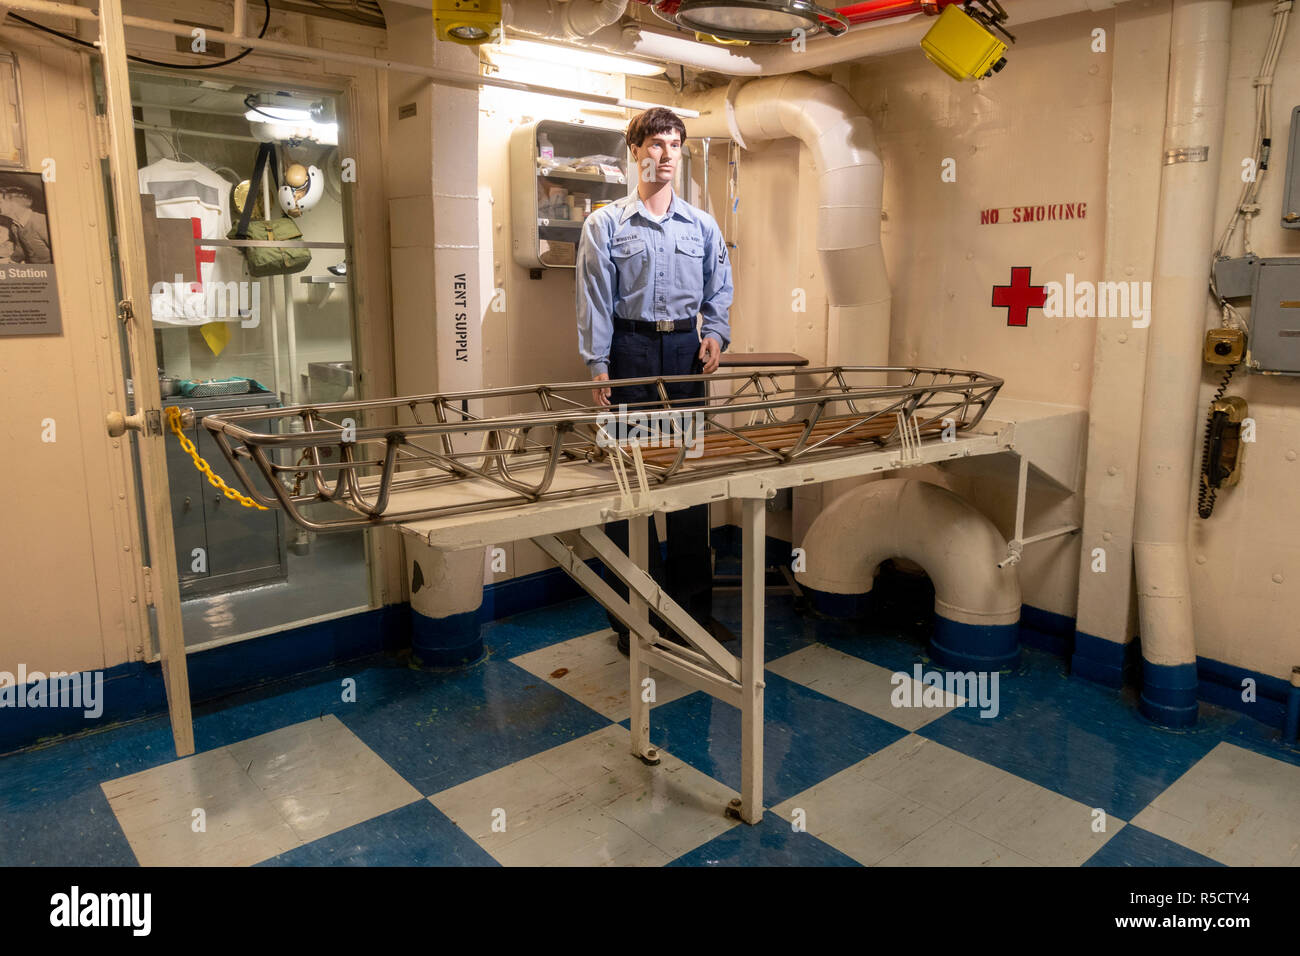 Schlacht dressing Station, USS Midway Museum, San Diego, California, United States. Stockfoto